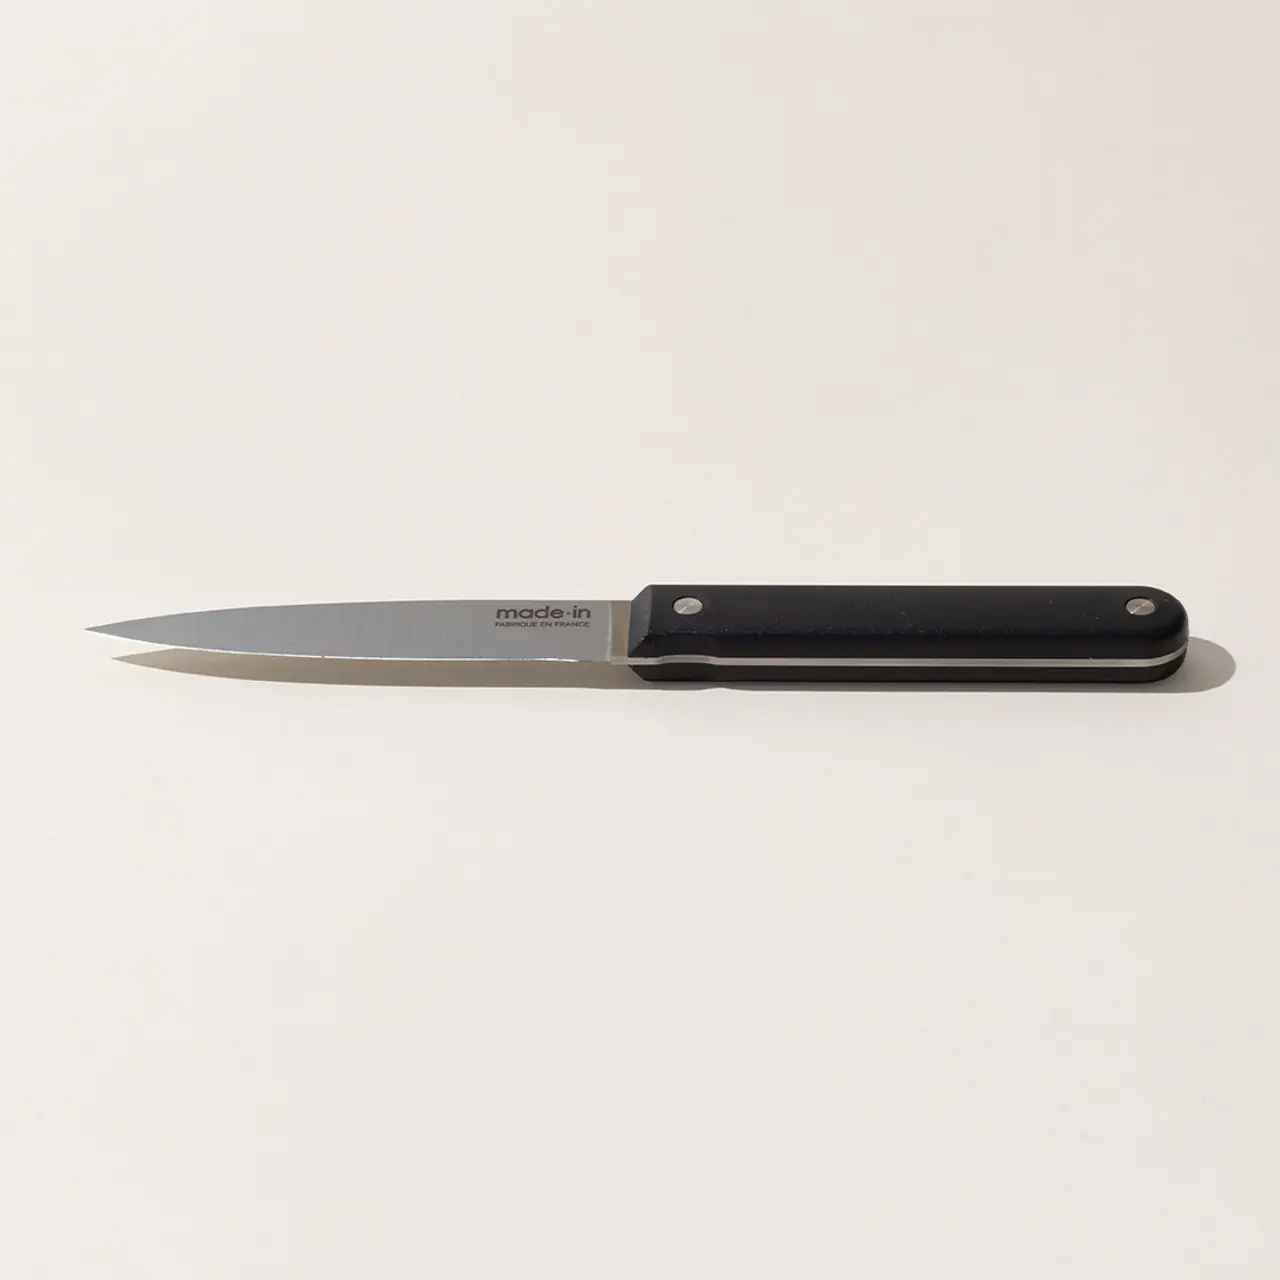 A kitchen knife with a black handle lies on a plain, light-colored surface.